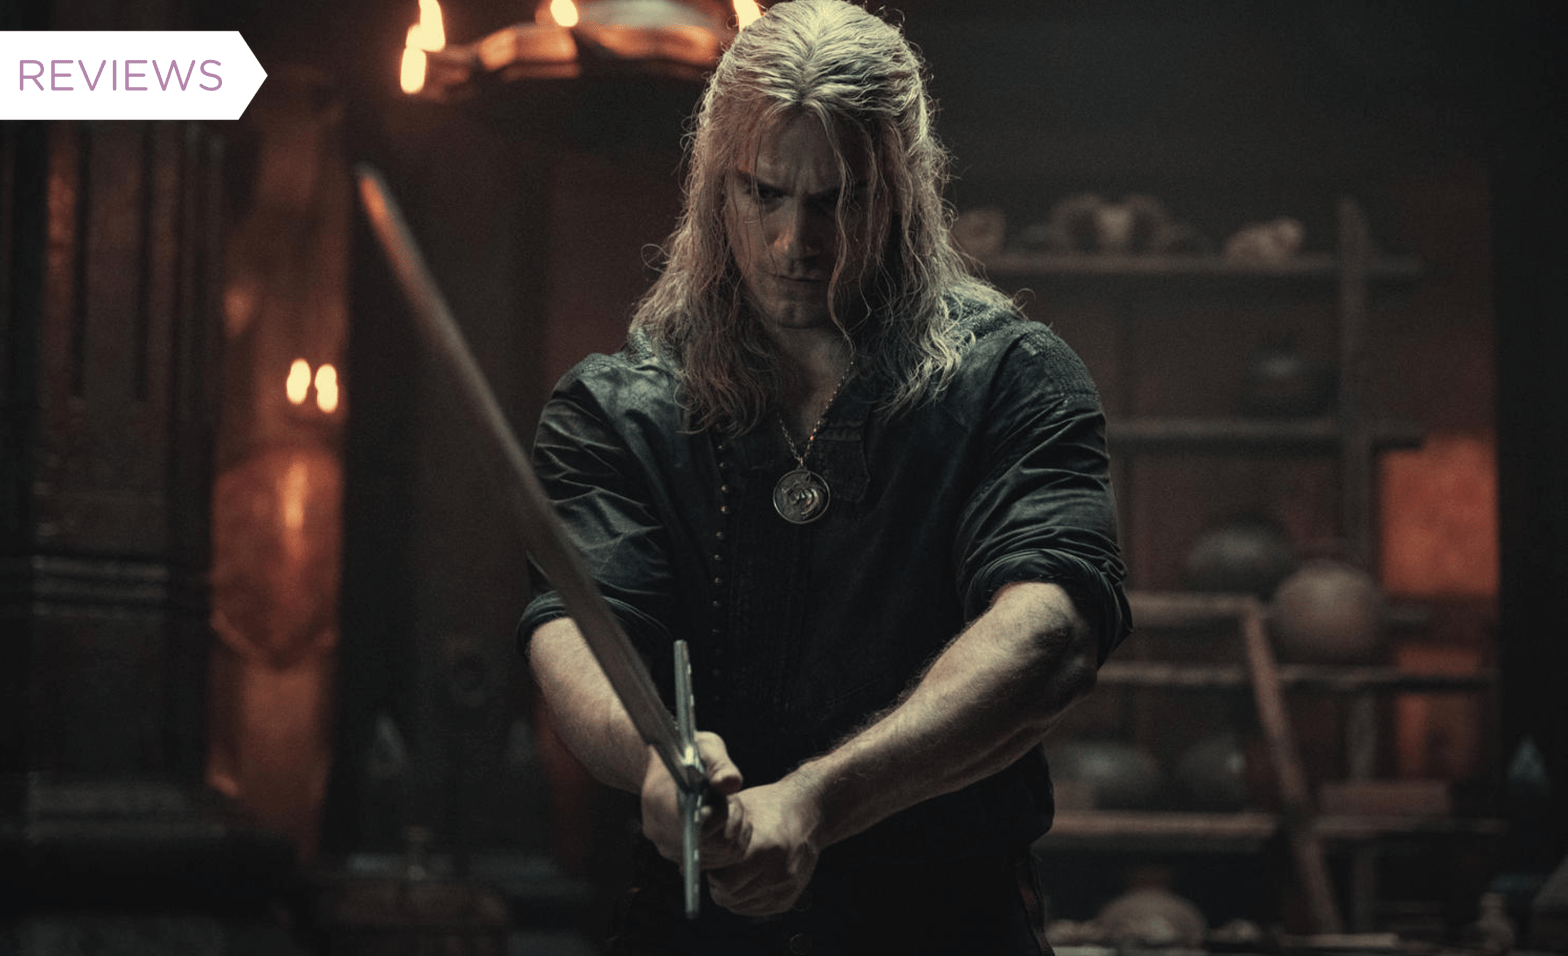 Watch it, Geralt, you'll have someone's eye out with that. (Image: Jay Maidment/Netflix)